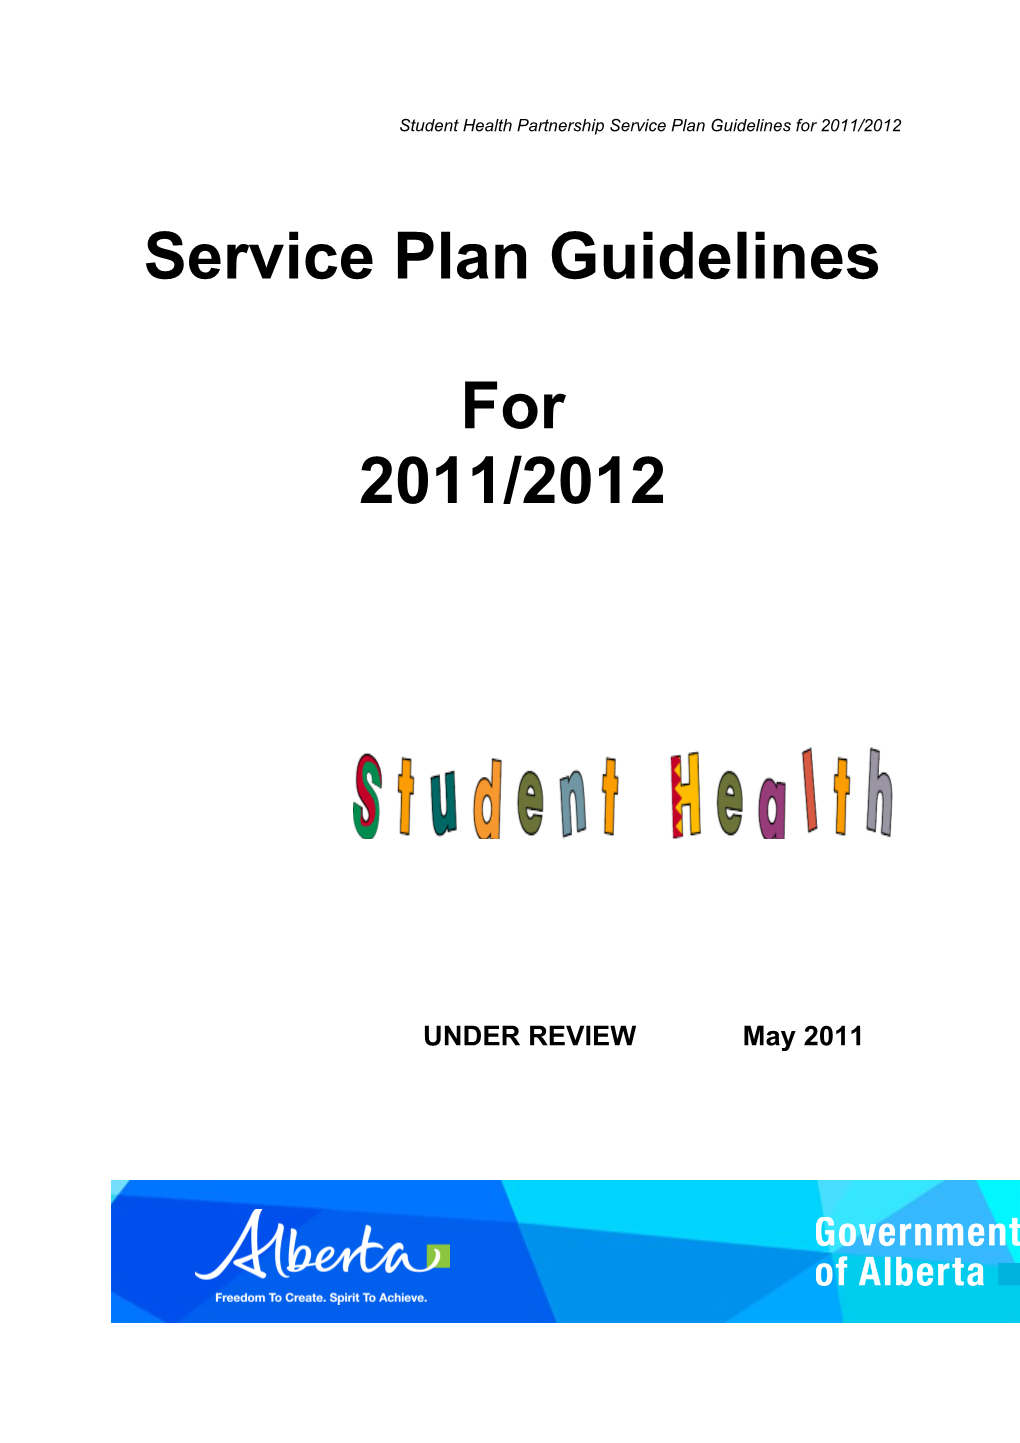 Service Plan Guidelines for 2008/2009